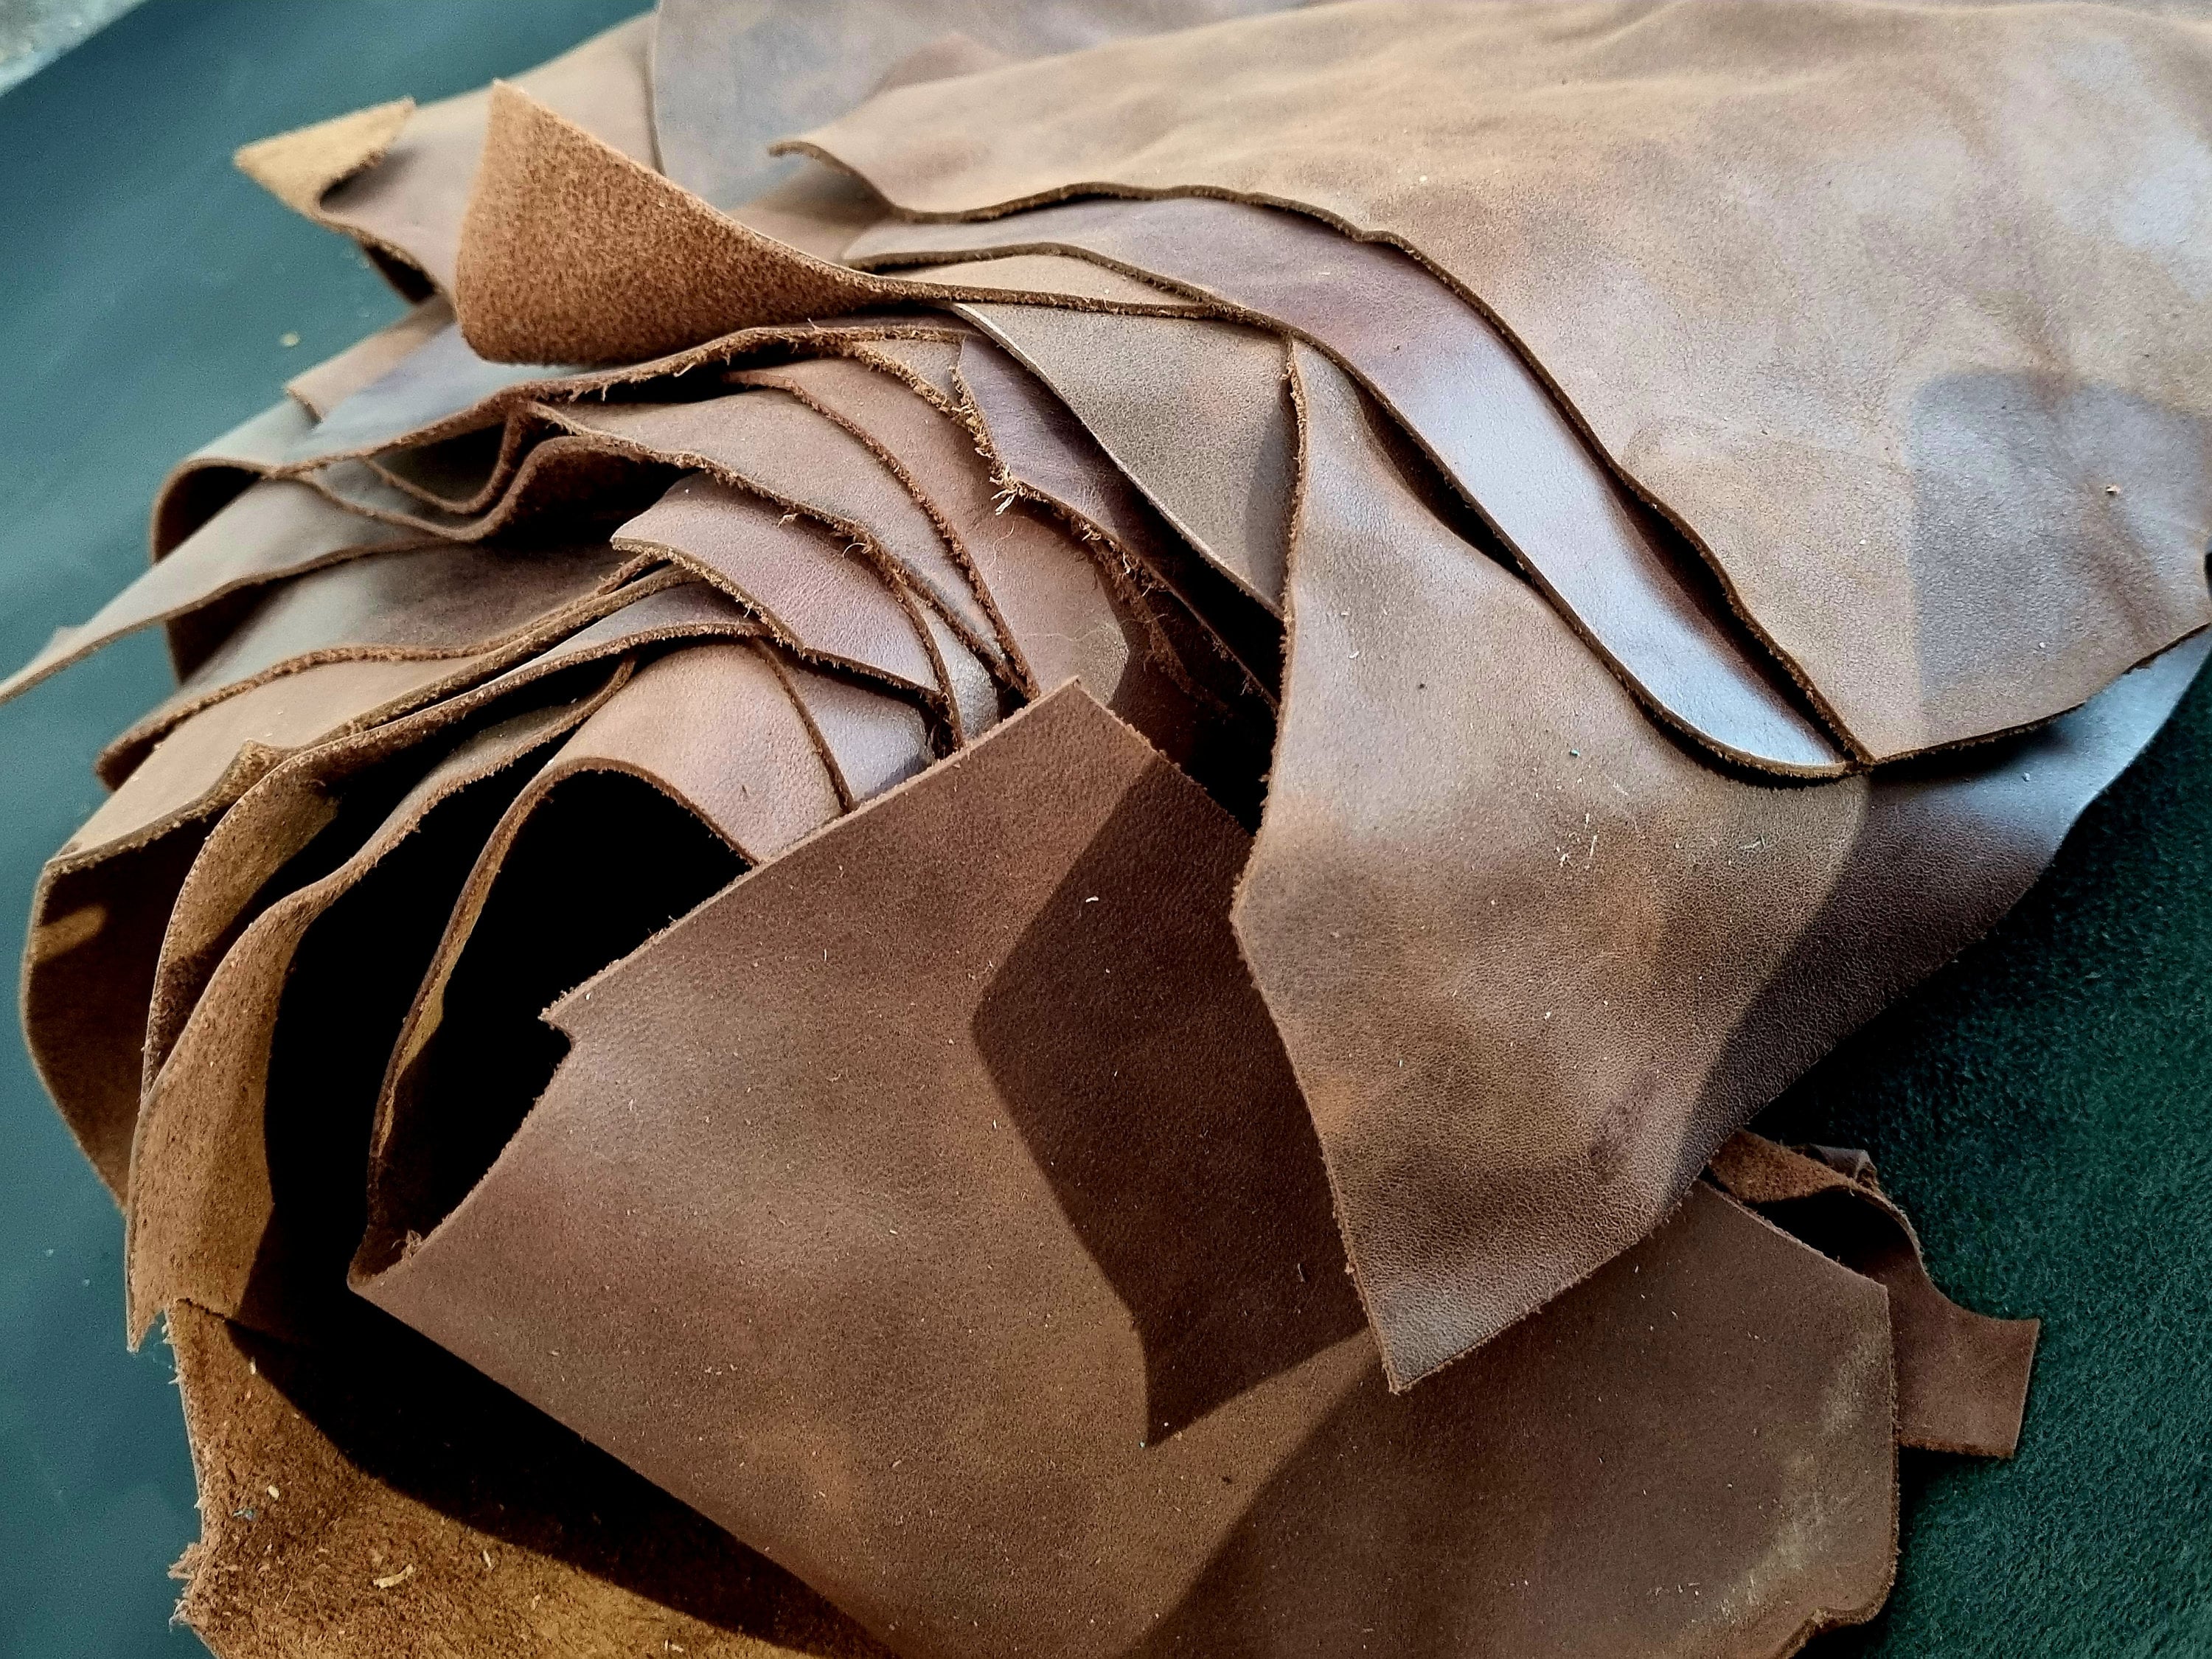 Genuine Leather / Upholstery Scraps / Recycle / Upcycle / Cowhide